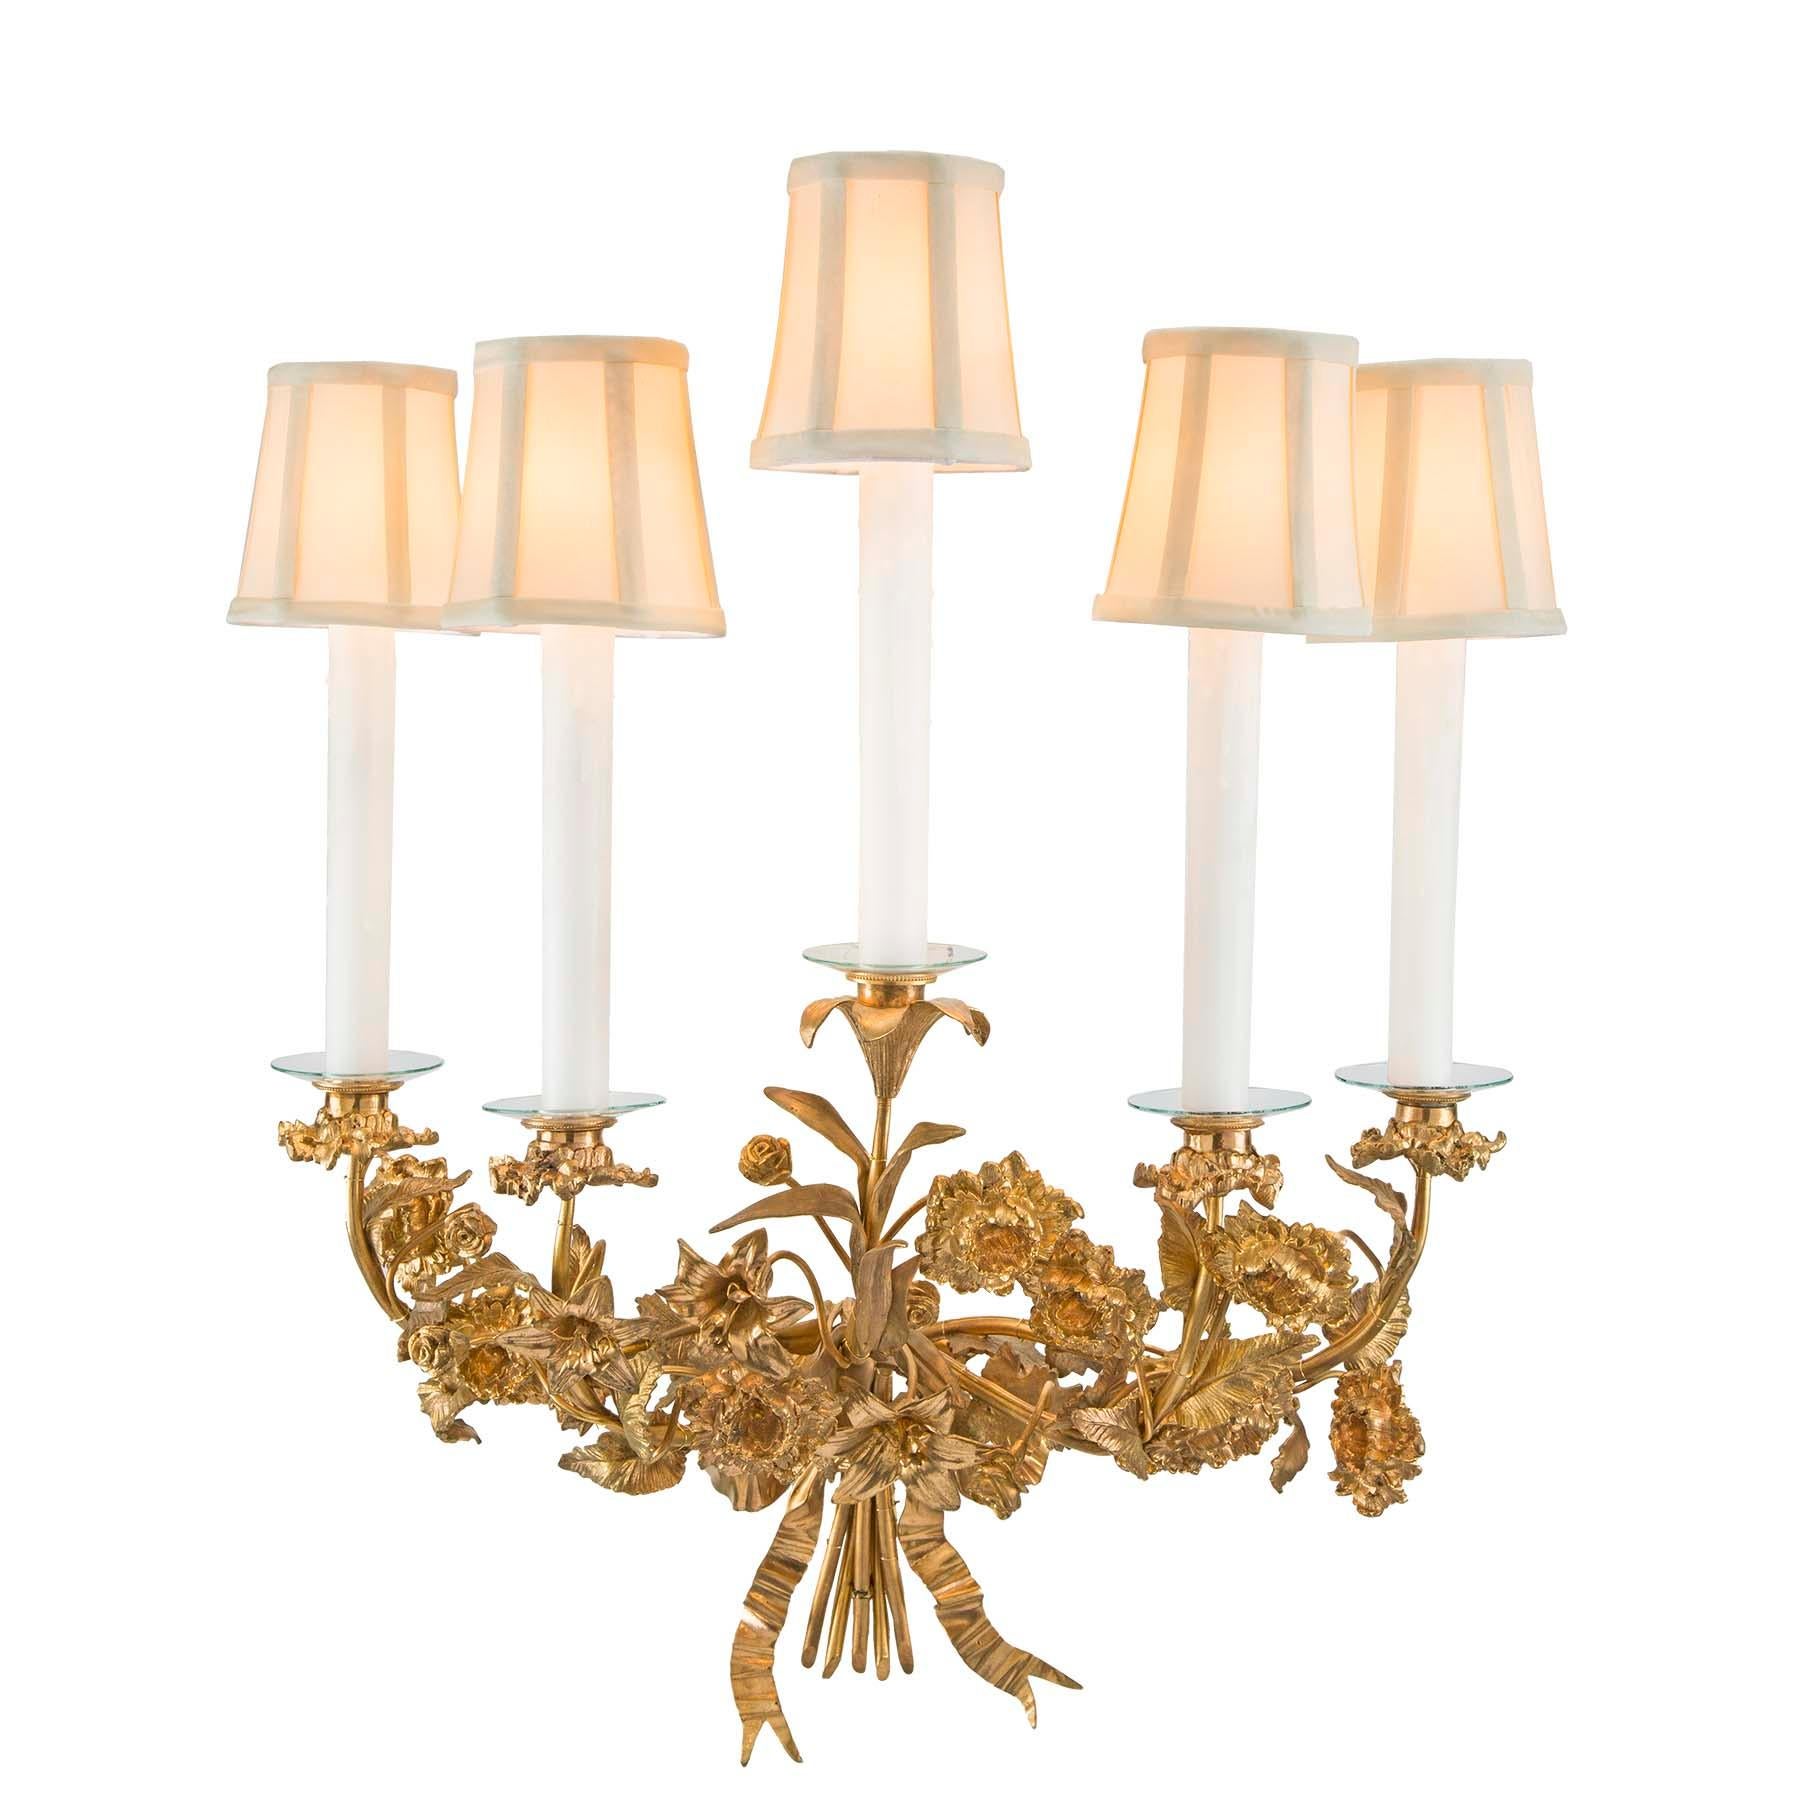 Pair of French 19th Century Louis XVI Style Ormolu Sconces In Good Condition For Sale In West Palm Beach, FL